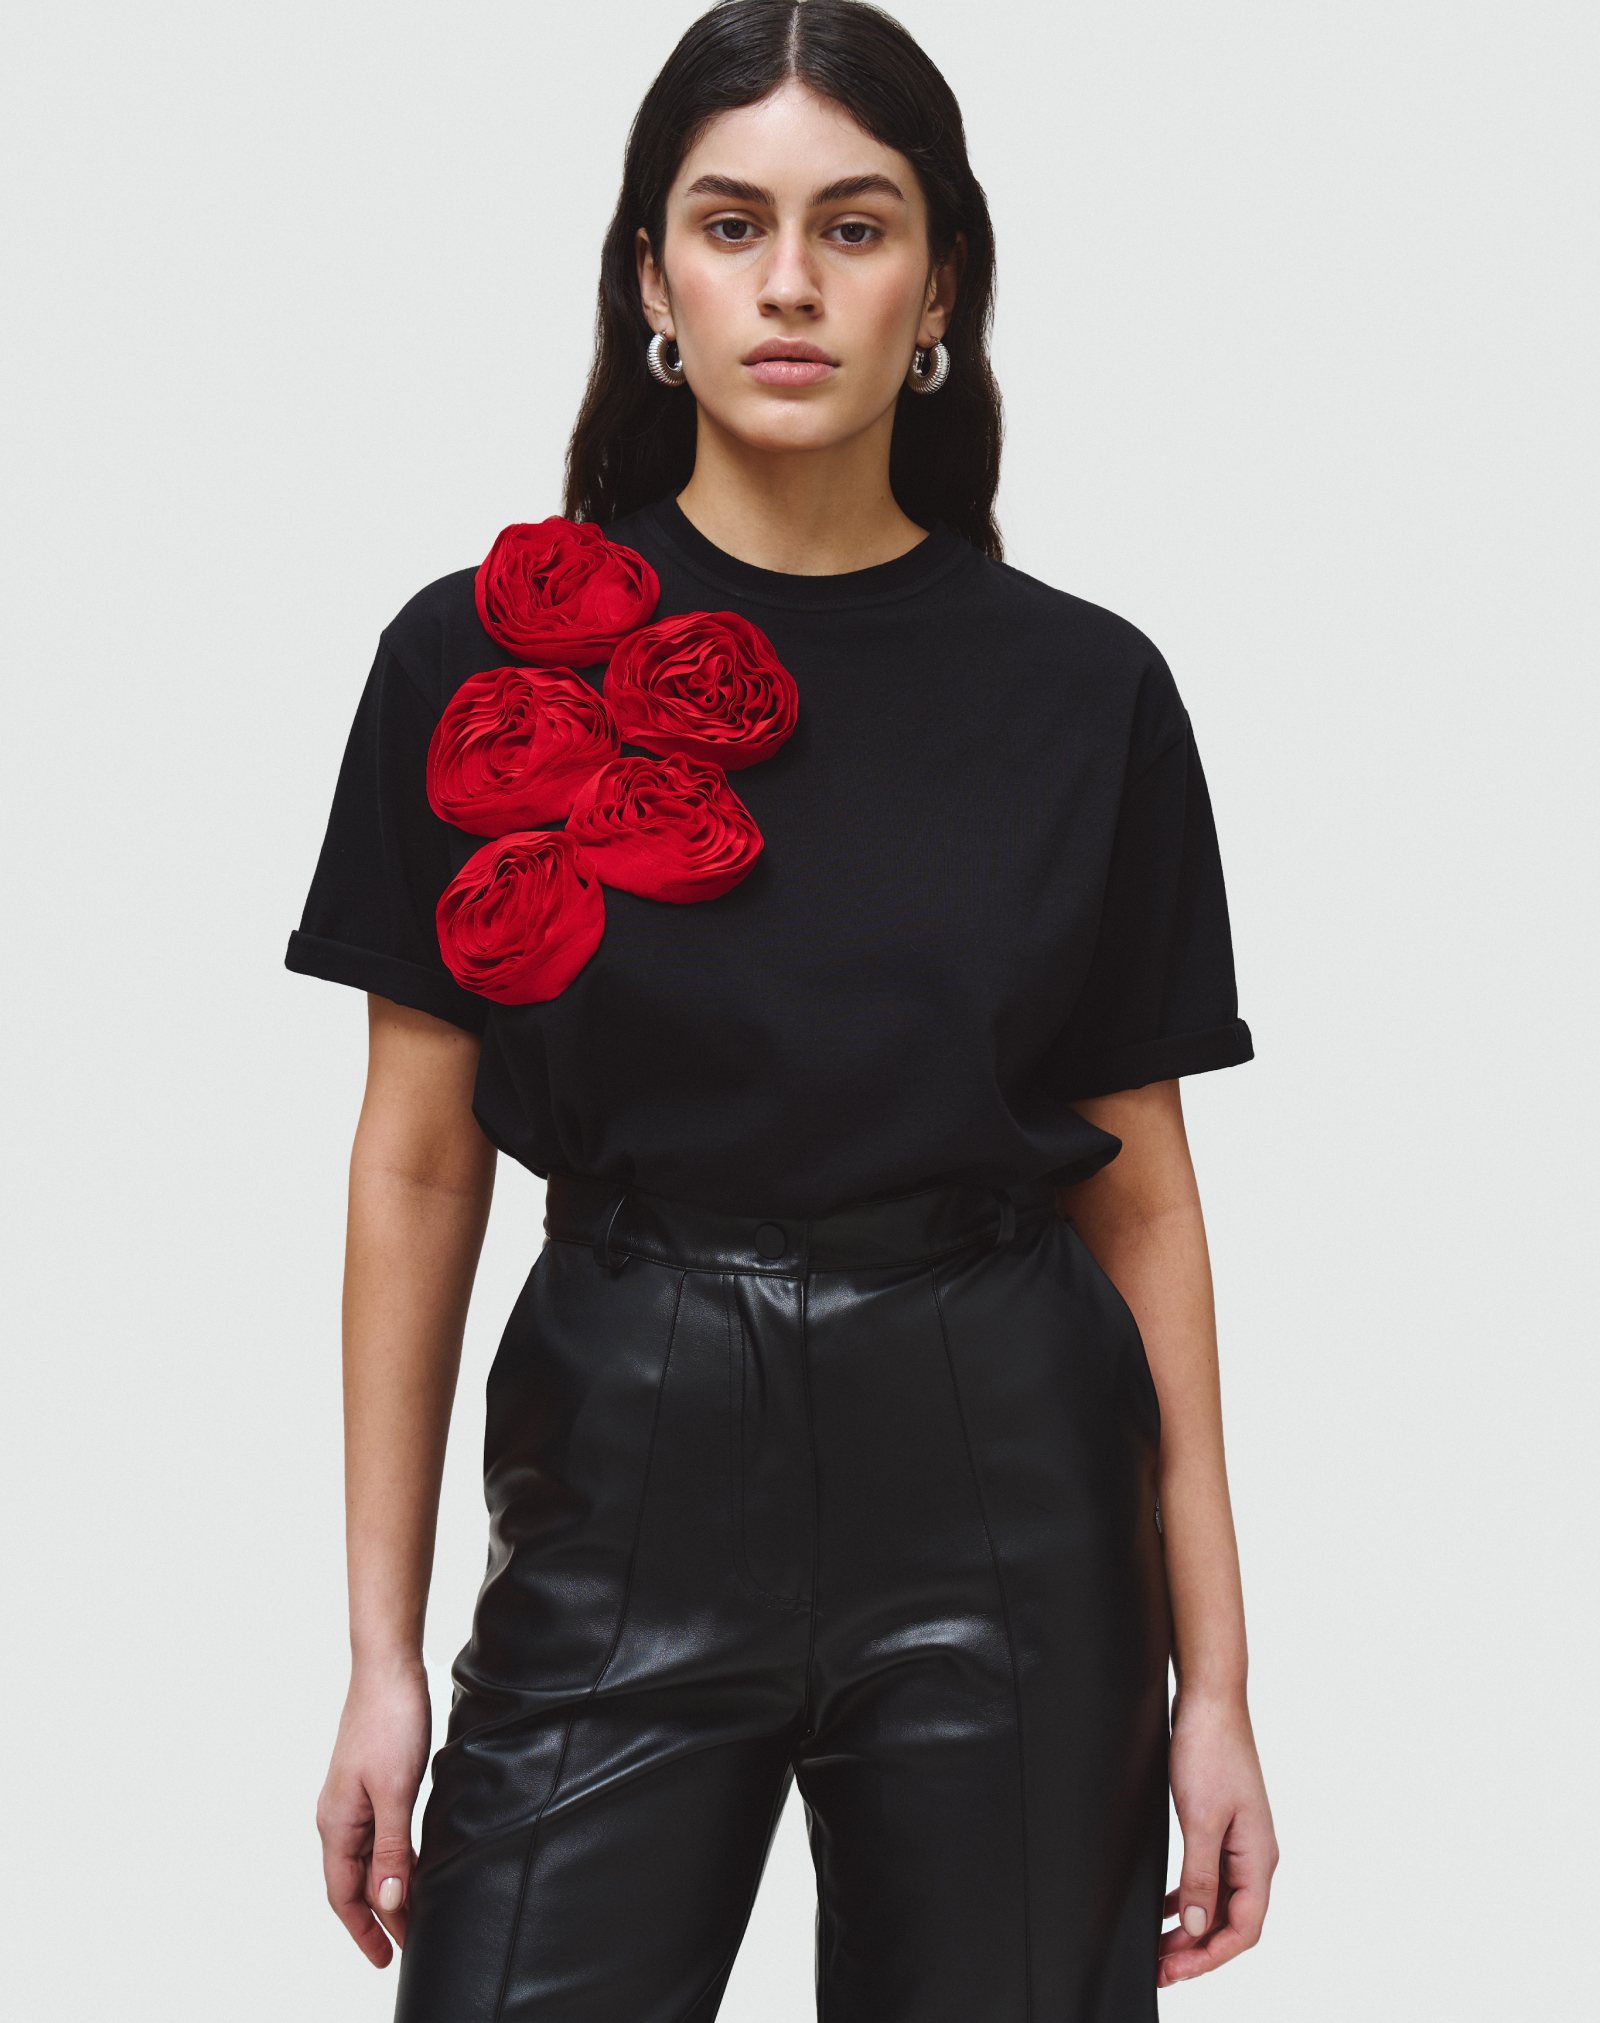 Loose T-shirt with red roses